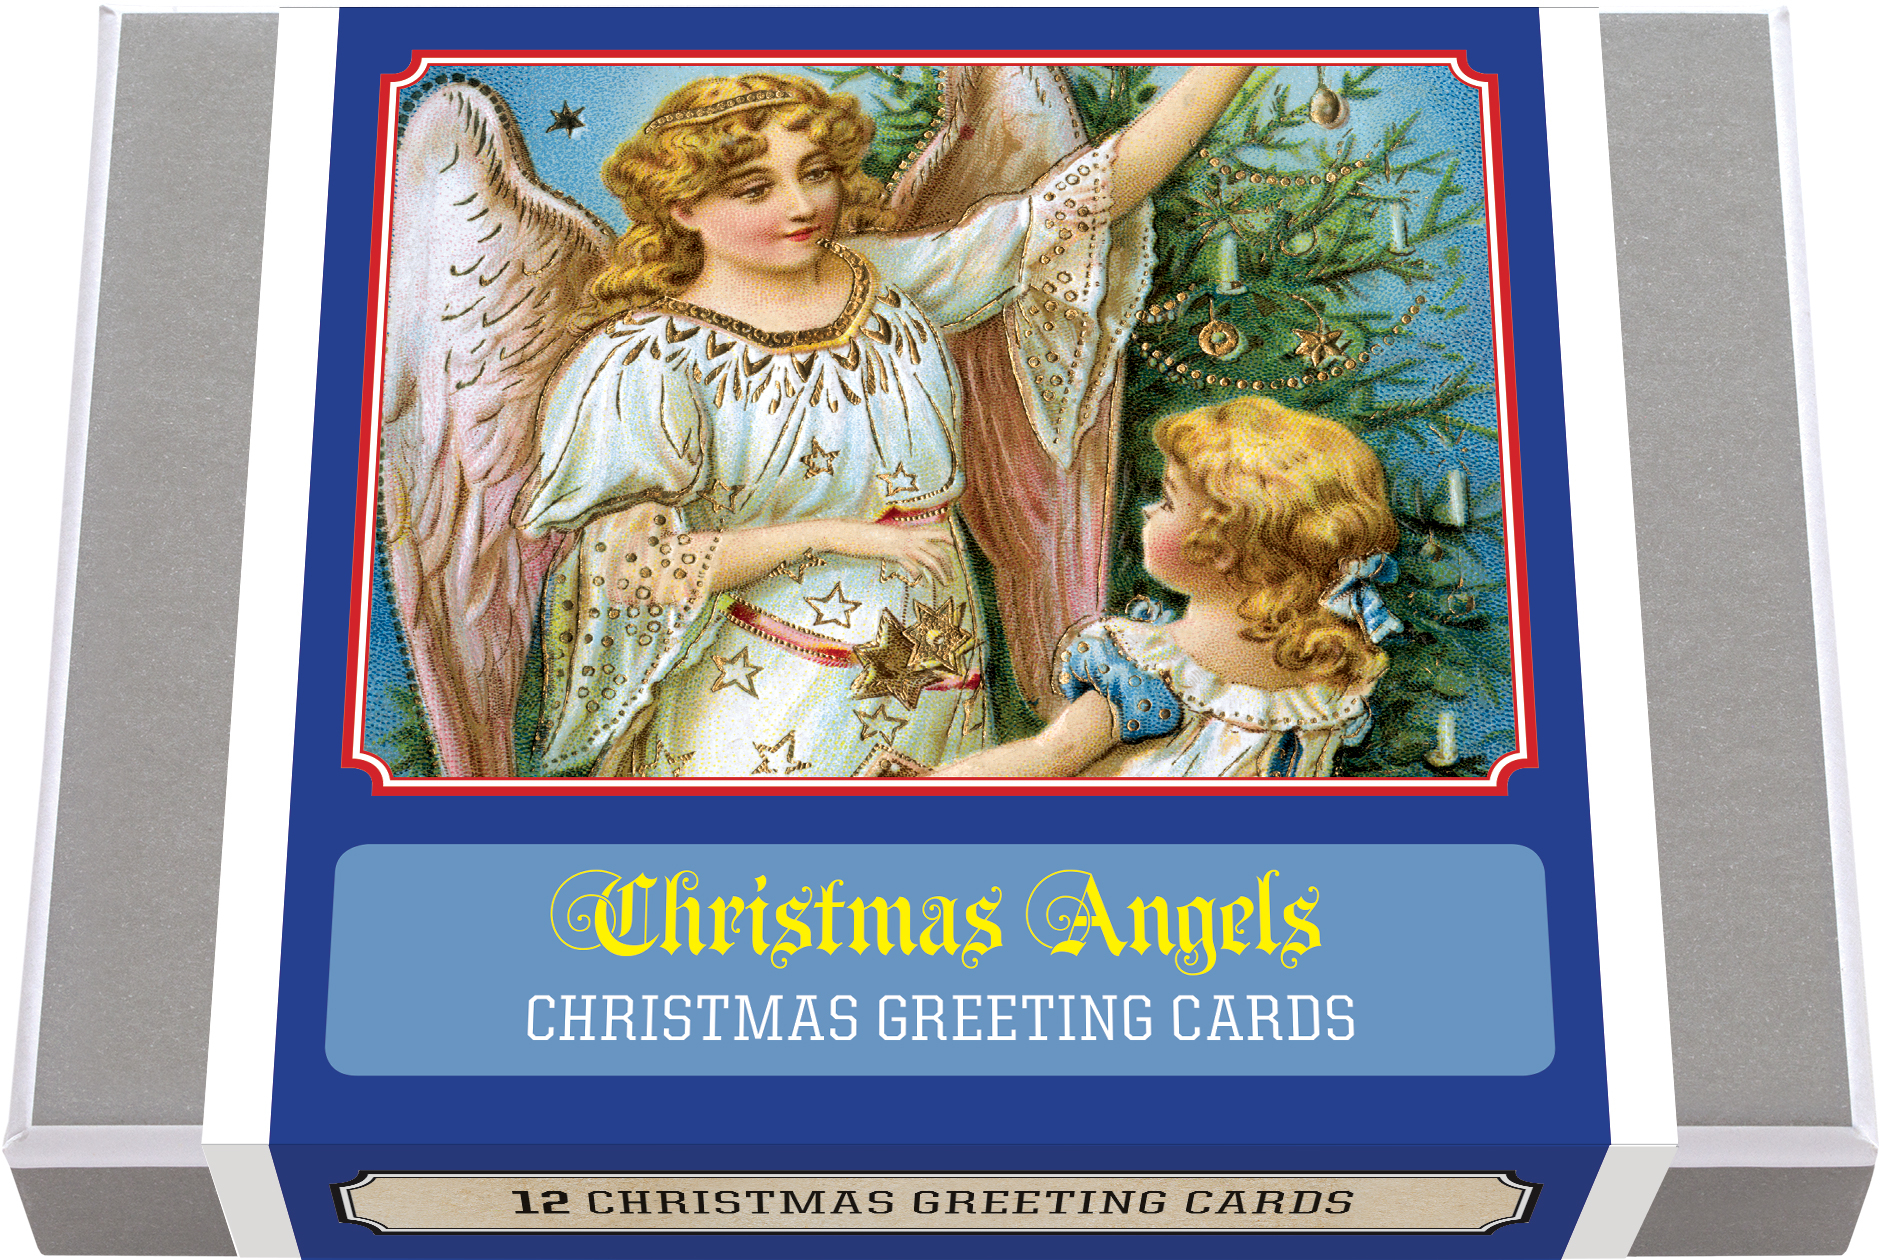 Greeting Cards - Christmas: Christmas Angels - Vintage Christmas Boxed Cards: 12 Christmas Greeting Cards (Other) - image 1 of 1